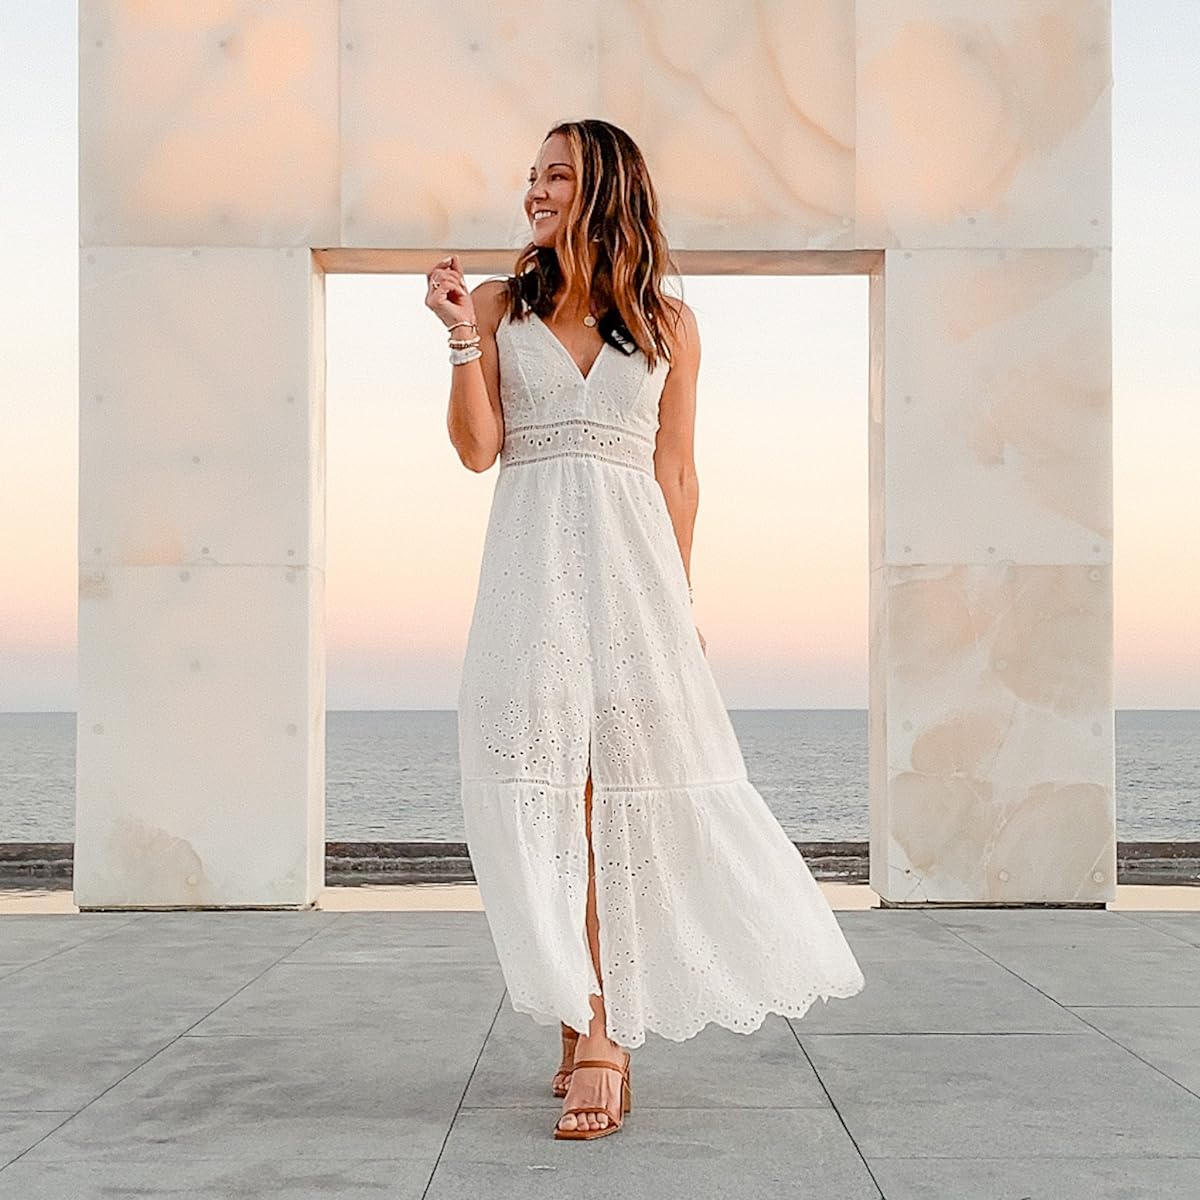 Spring into the season with these must-see dresses, accessories, and more | spring, spring fashion, spring dress, spring dresses, maxi dress, white dress, spaghetti strap, heel, neutral fashion, resort wear, vacation outfit